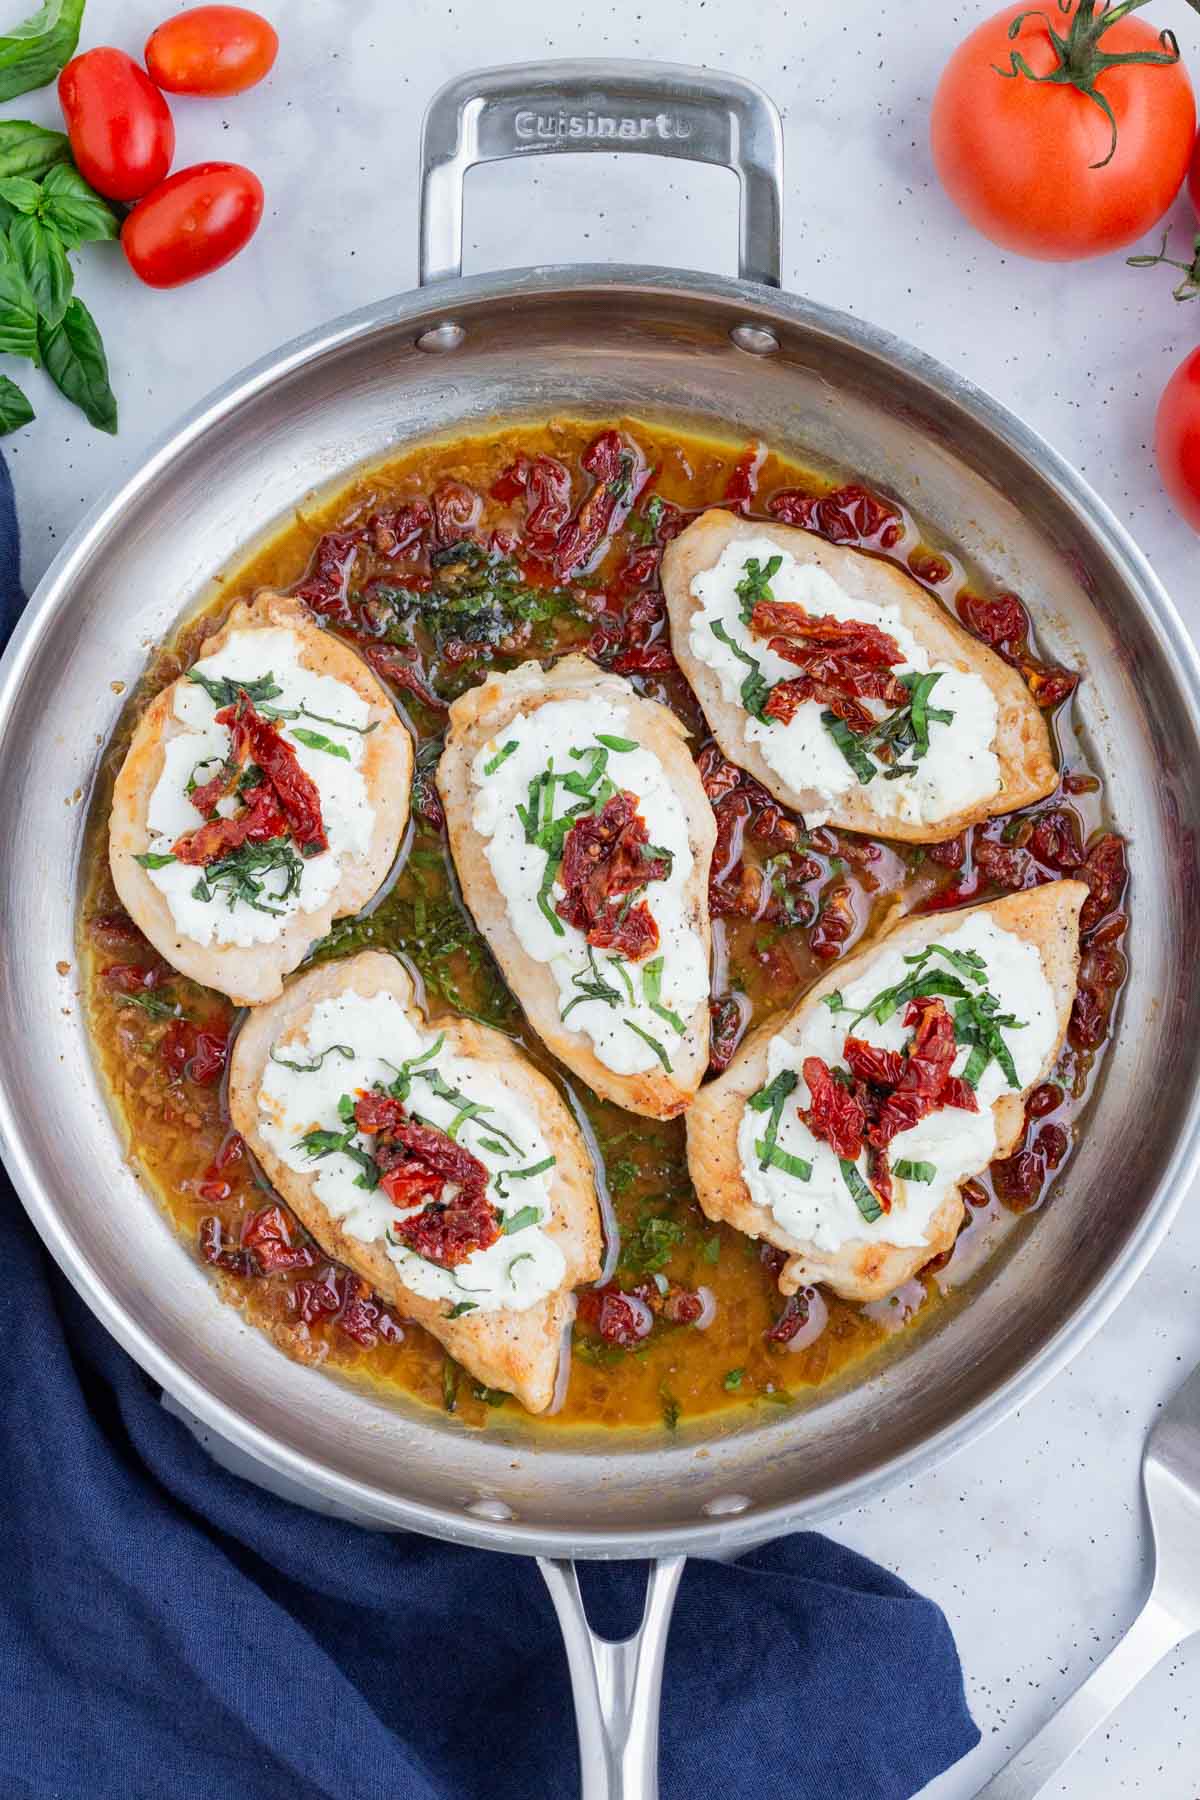 Chicken is cooked with goat cheese, sundried tomatoes, and basil in a skillet.